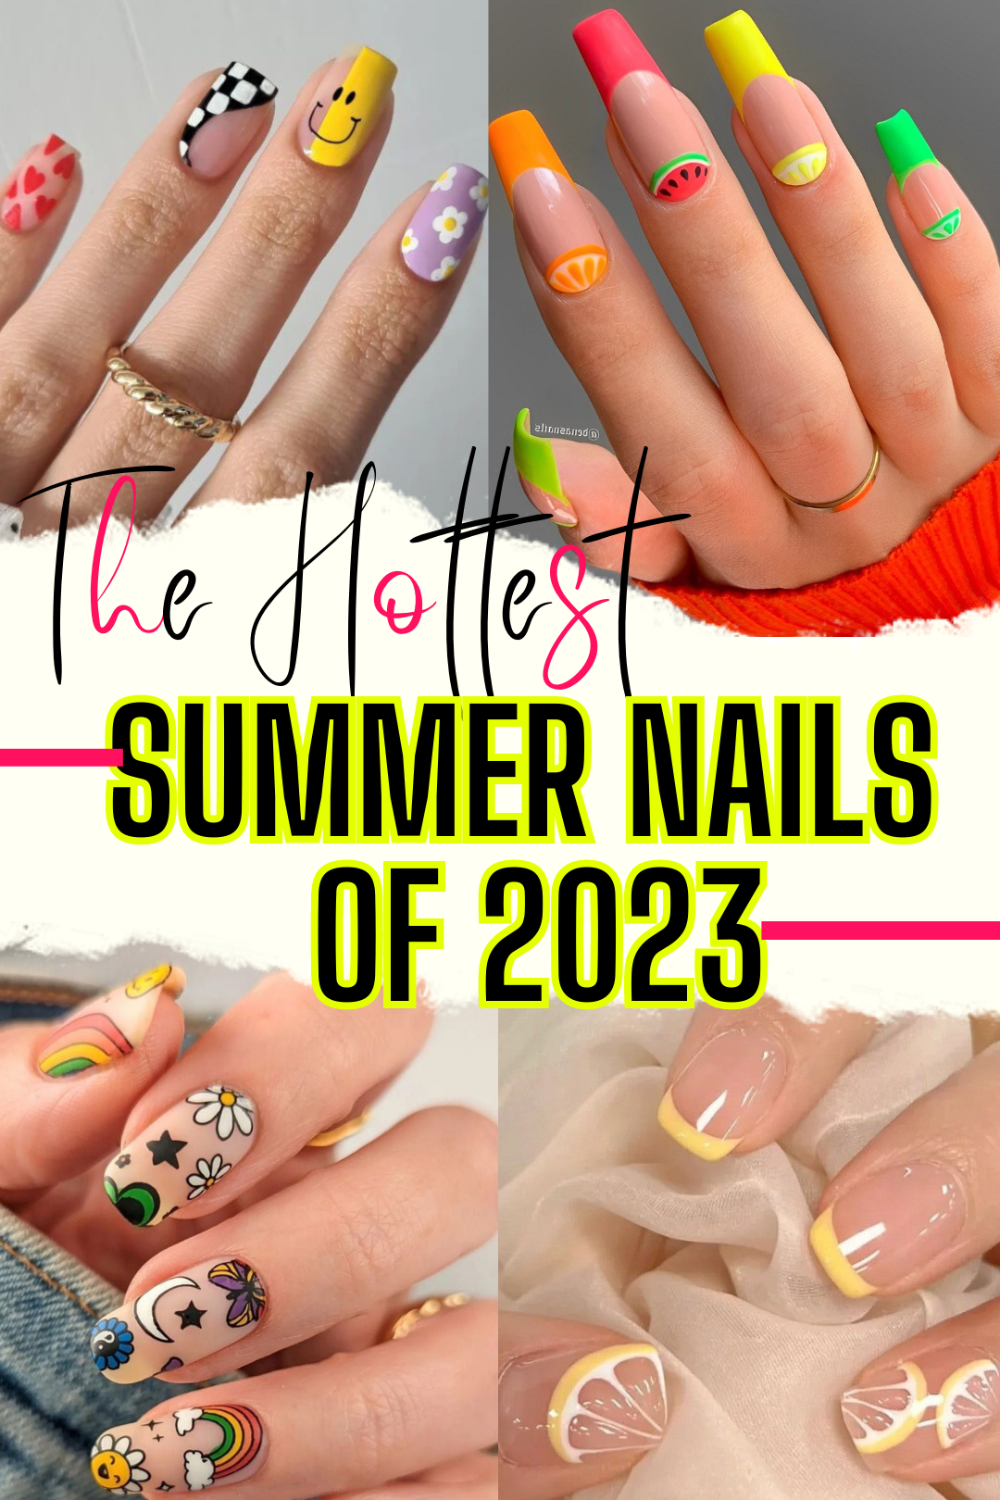 Hottest Summer Nails of 2023